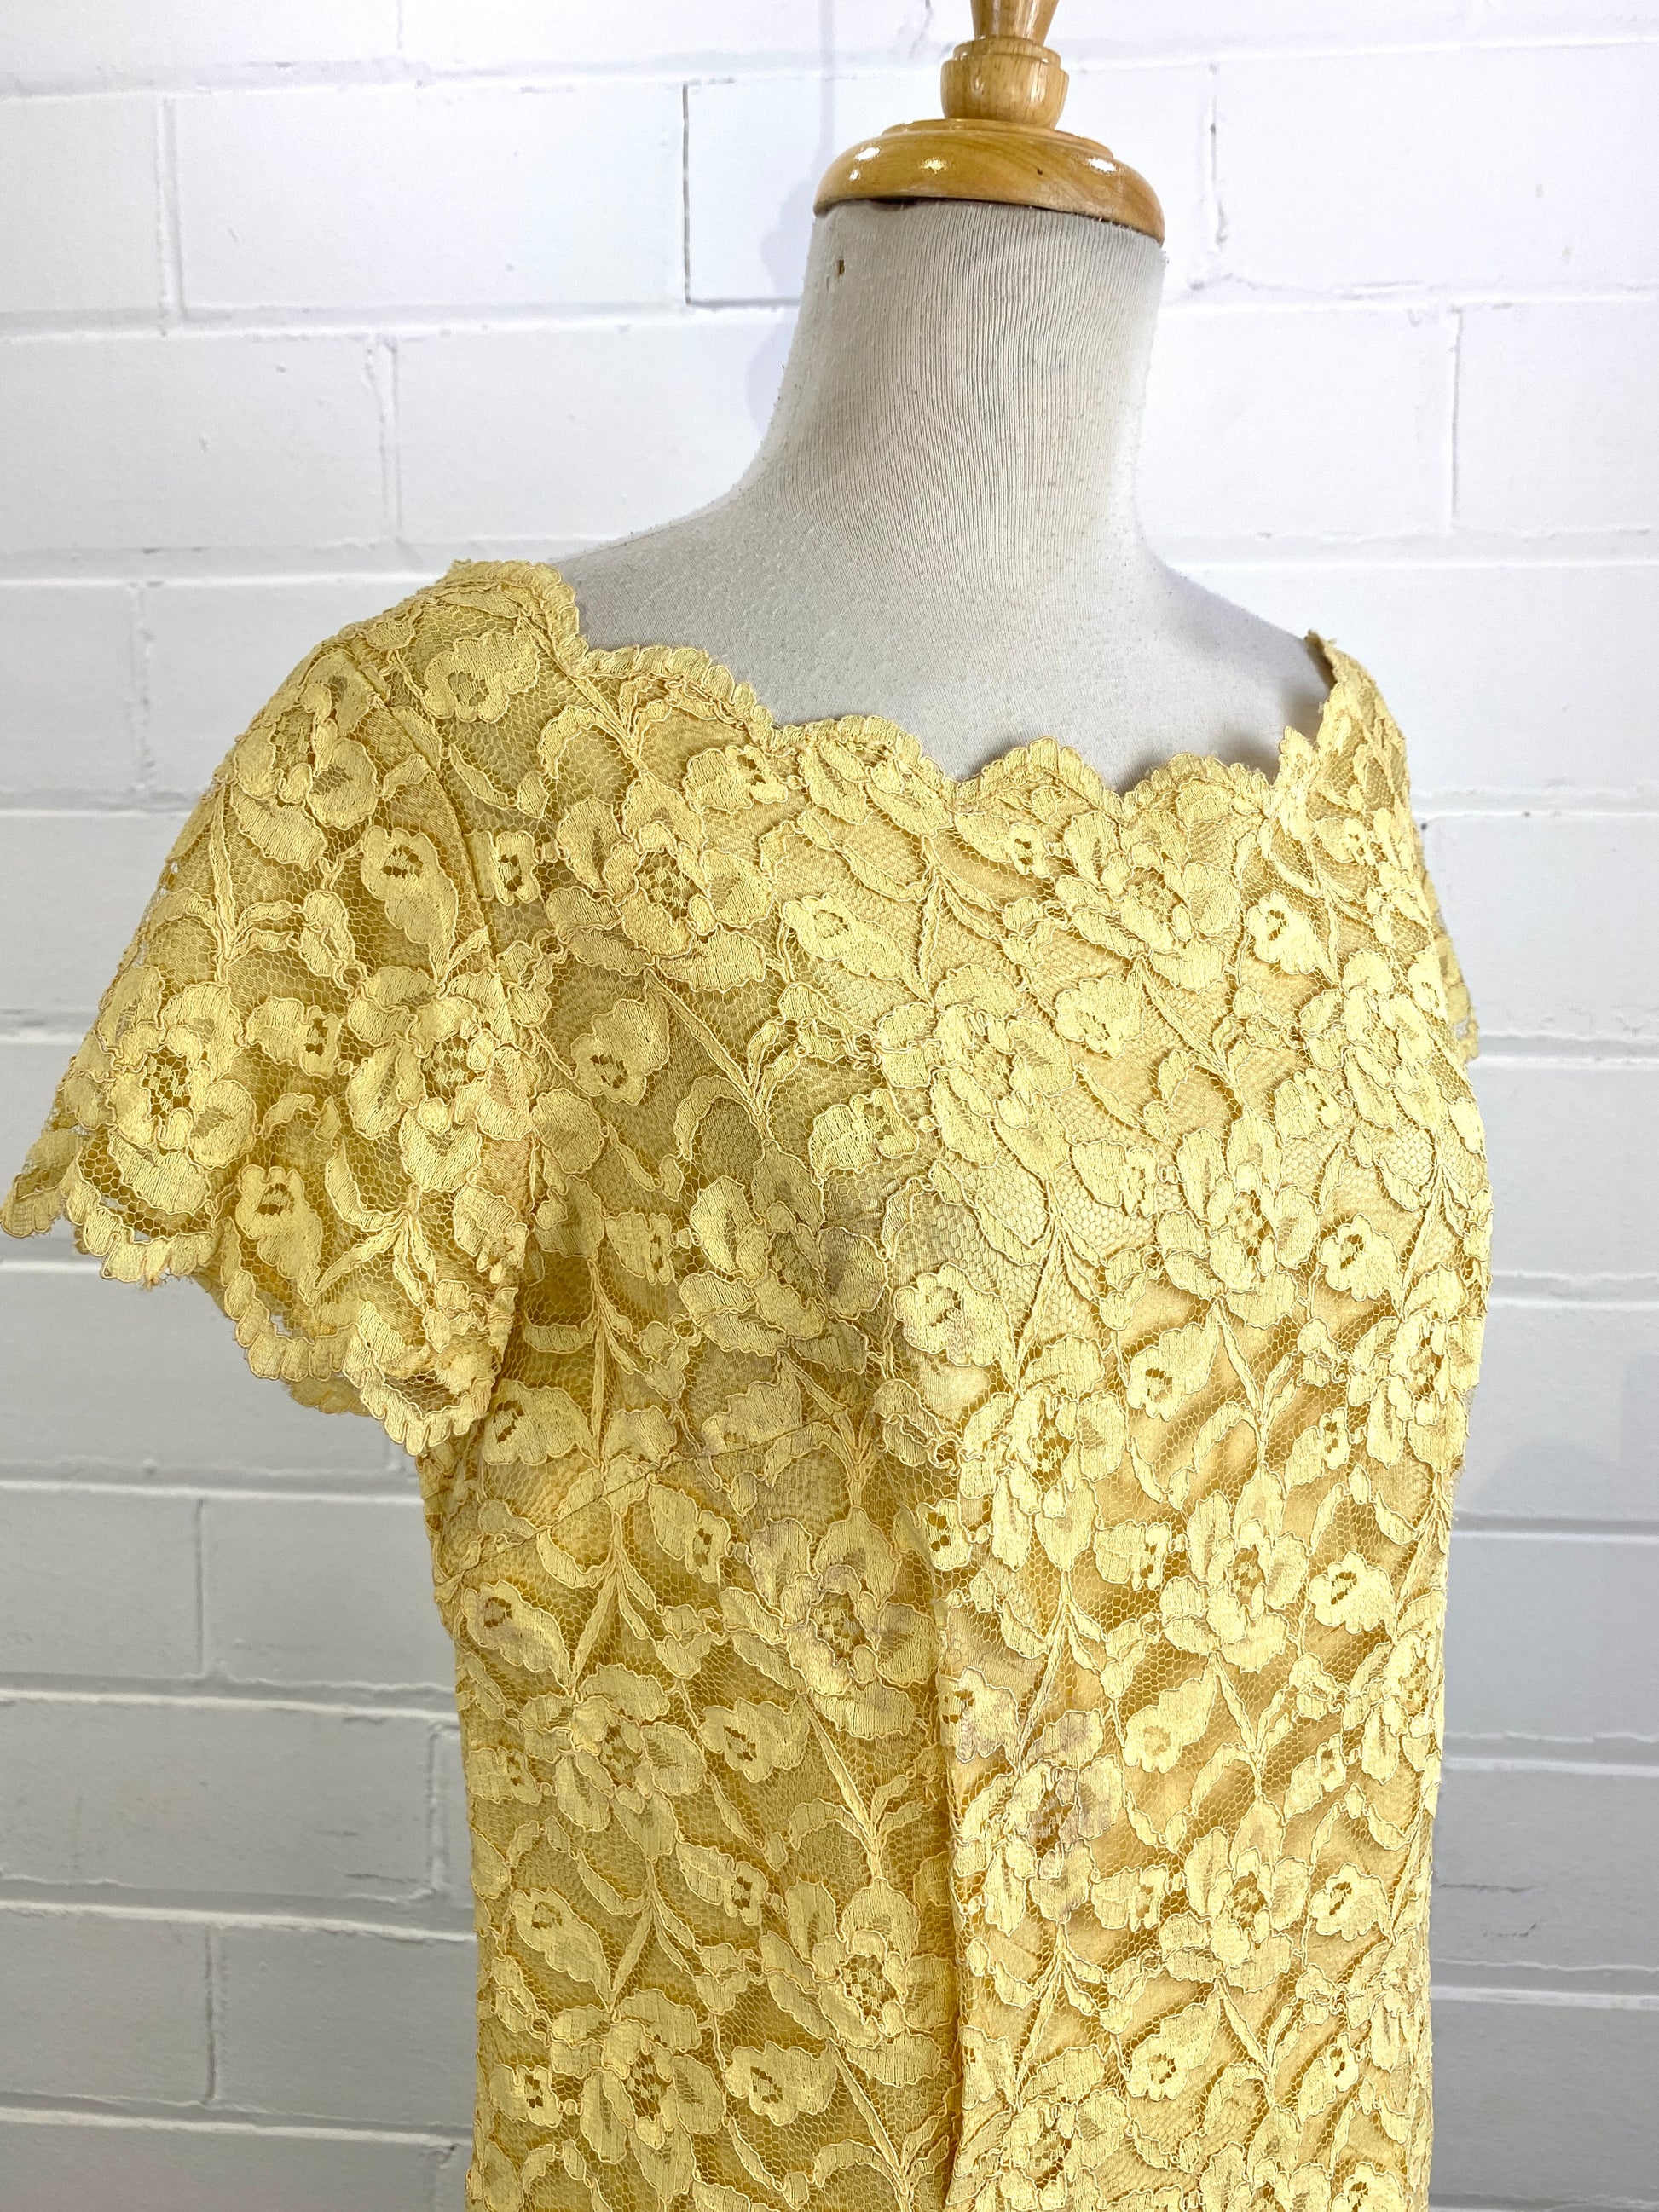 Vintage 1960s Yellow Lace Shift Dress with Bow, Large. Ian Drummond Vintage.